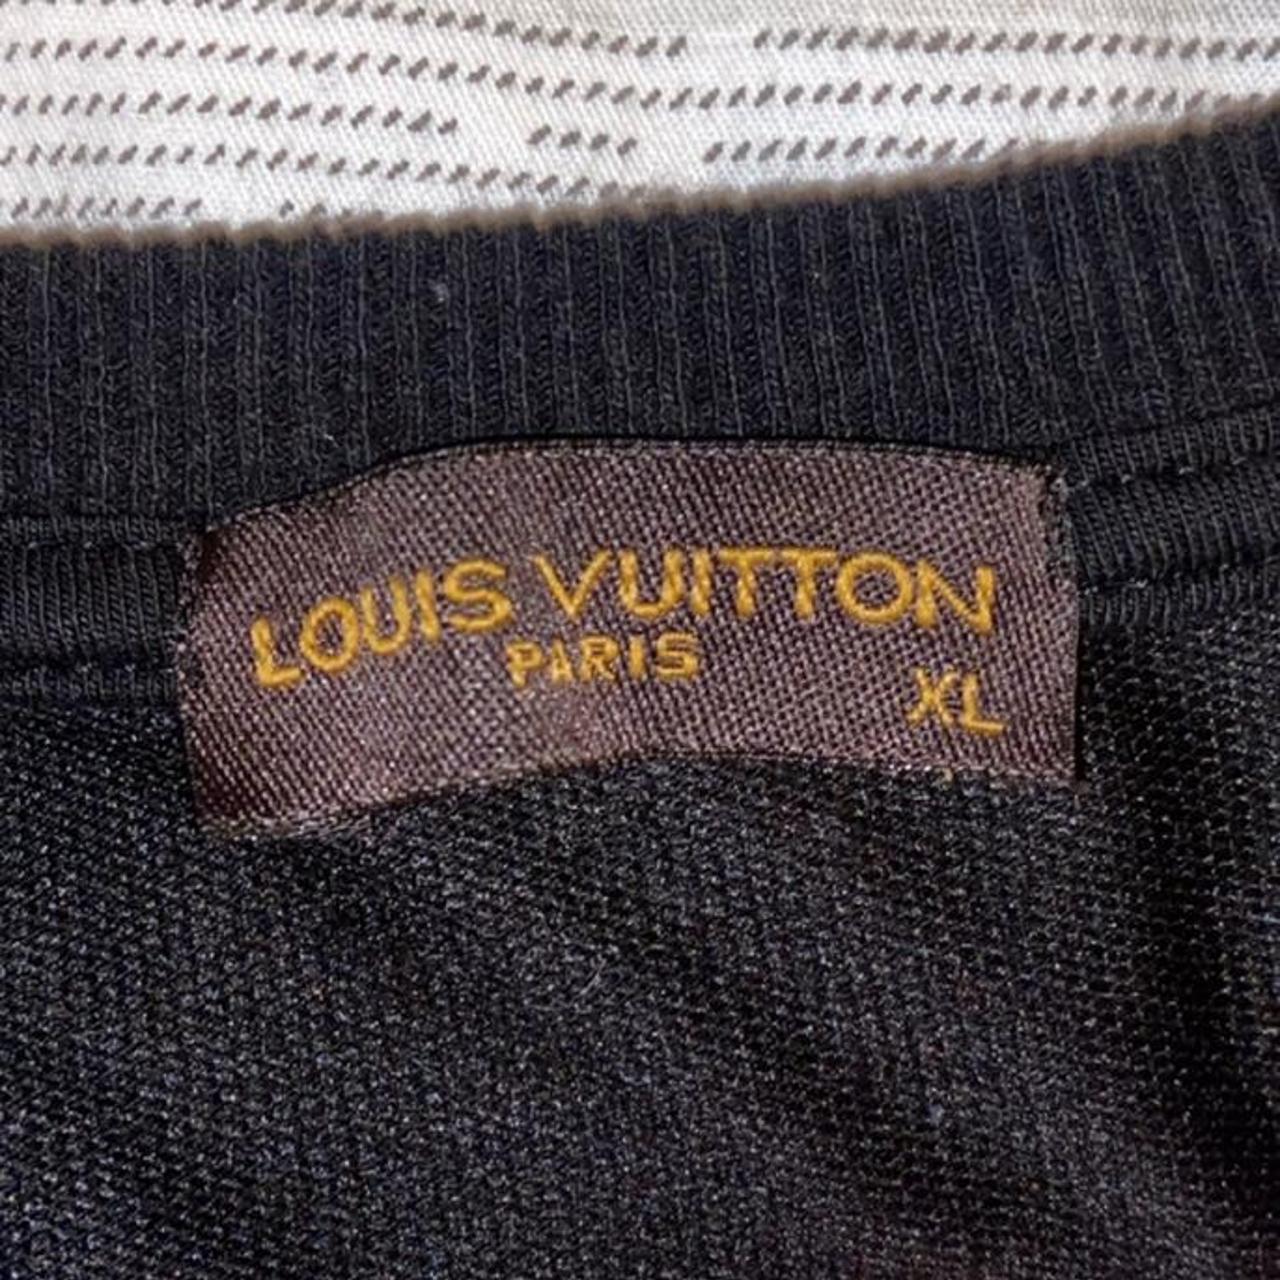 Louis Vuitton sweater. Worn once. Just don't have - Depop